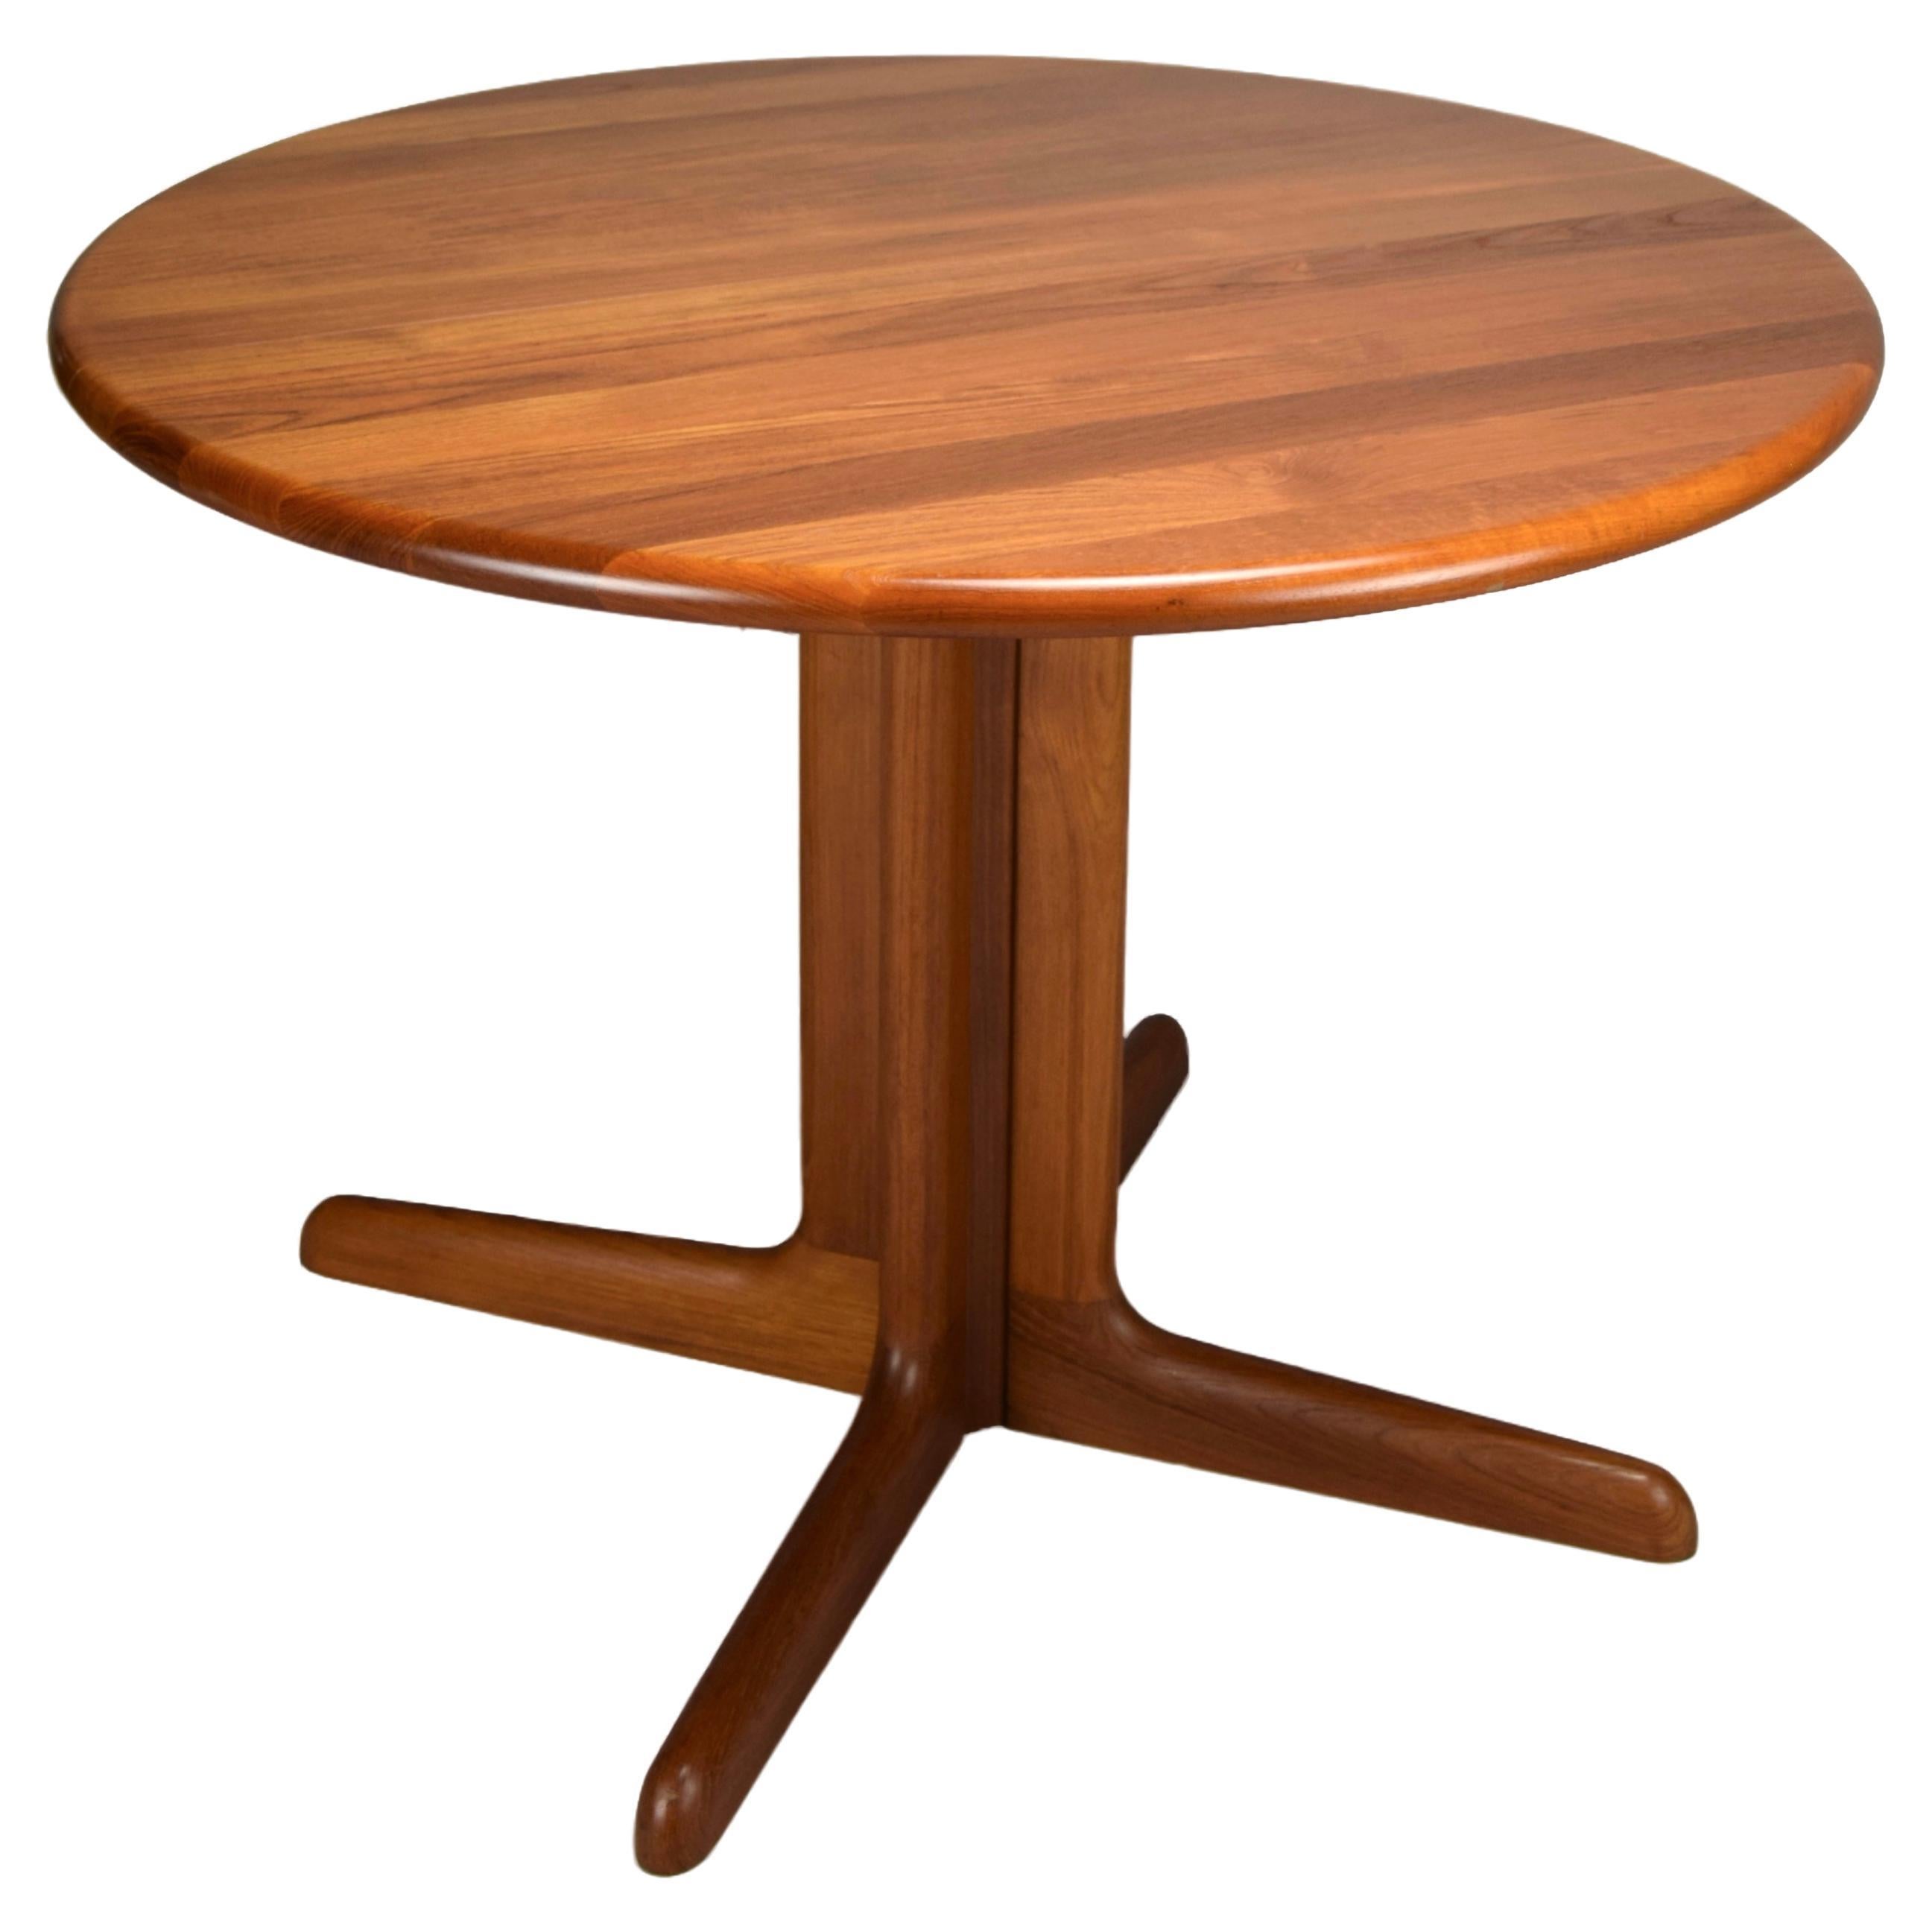 Extendable Danish Mid-Century Modern Solid Jatoba Wooden Dining Table For Sale